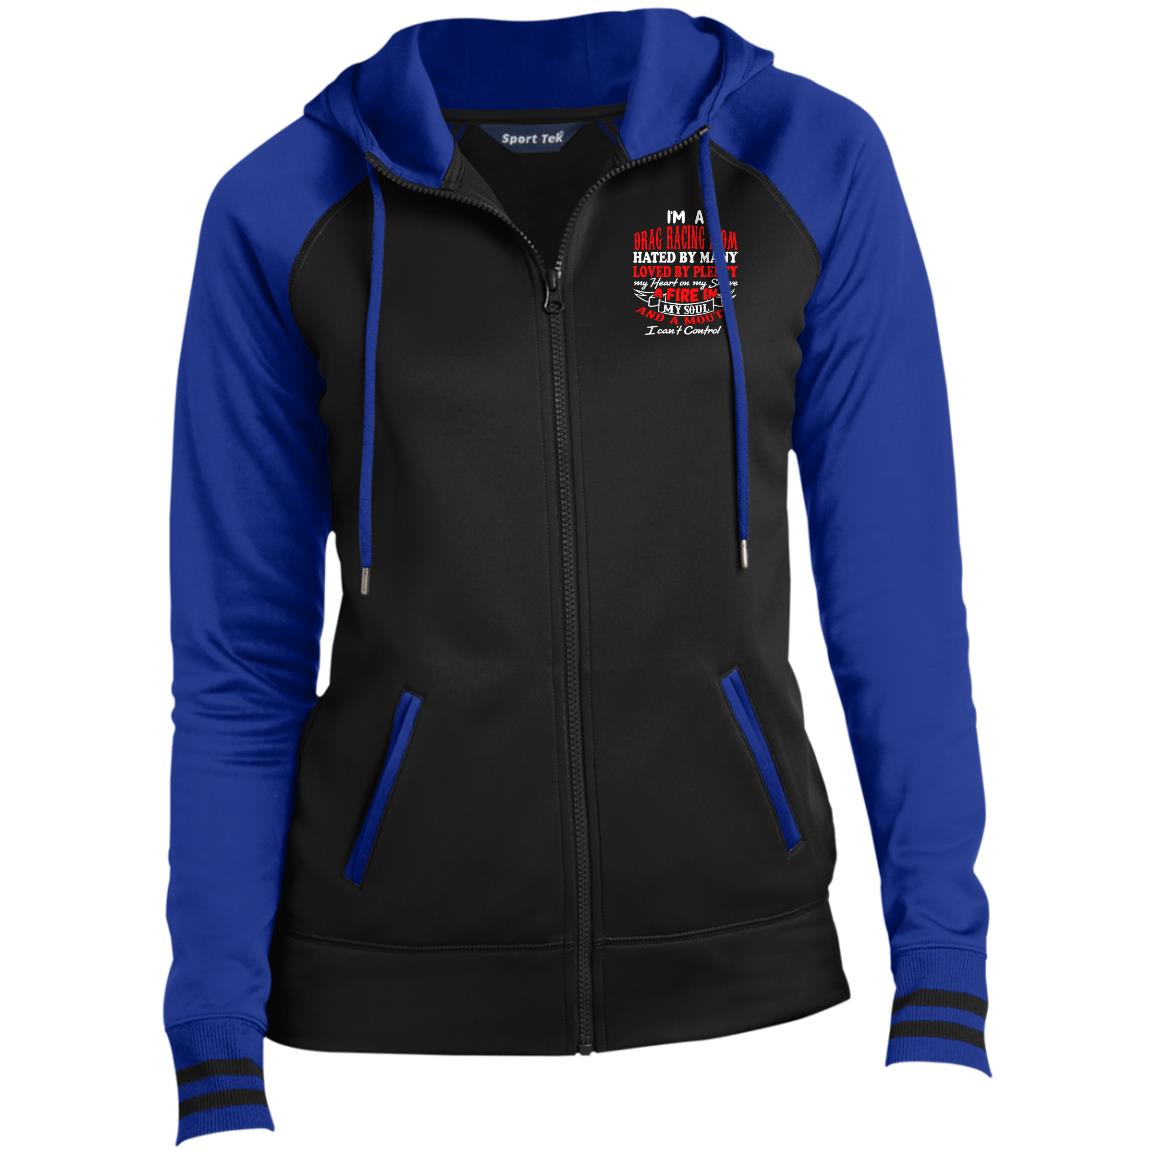 I'm A Drag Racing Mom Hated By Many Loved By Plenty Ladies' Sport-Wick® Full-Zip Hooded Jacket